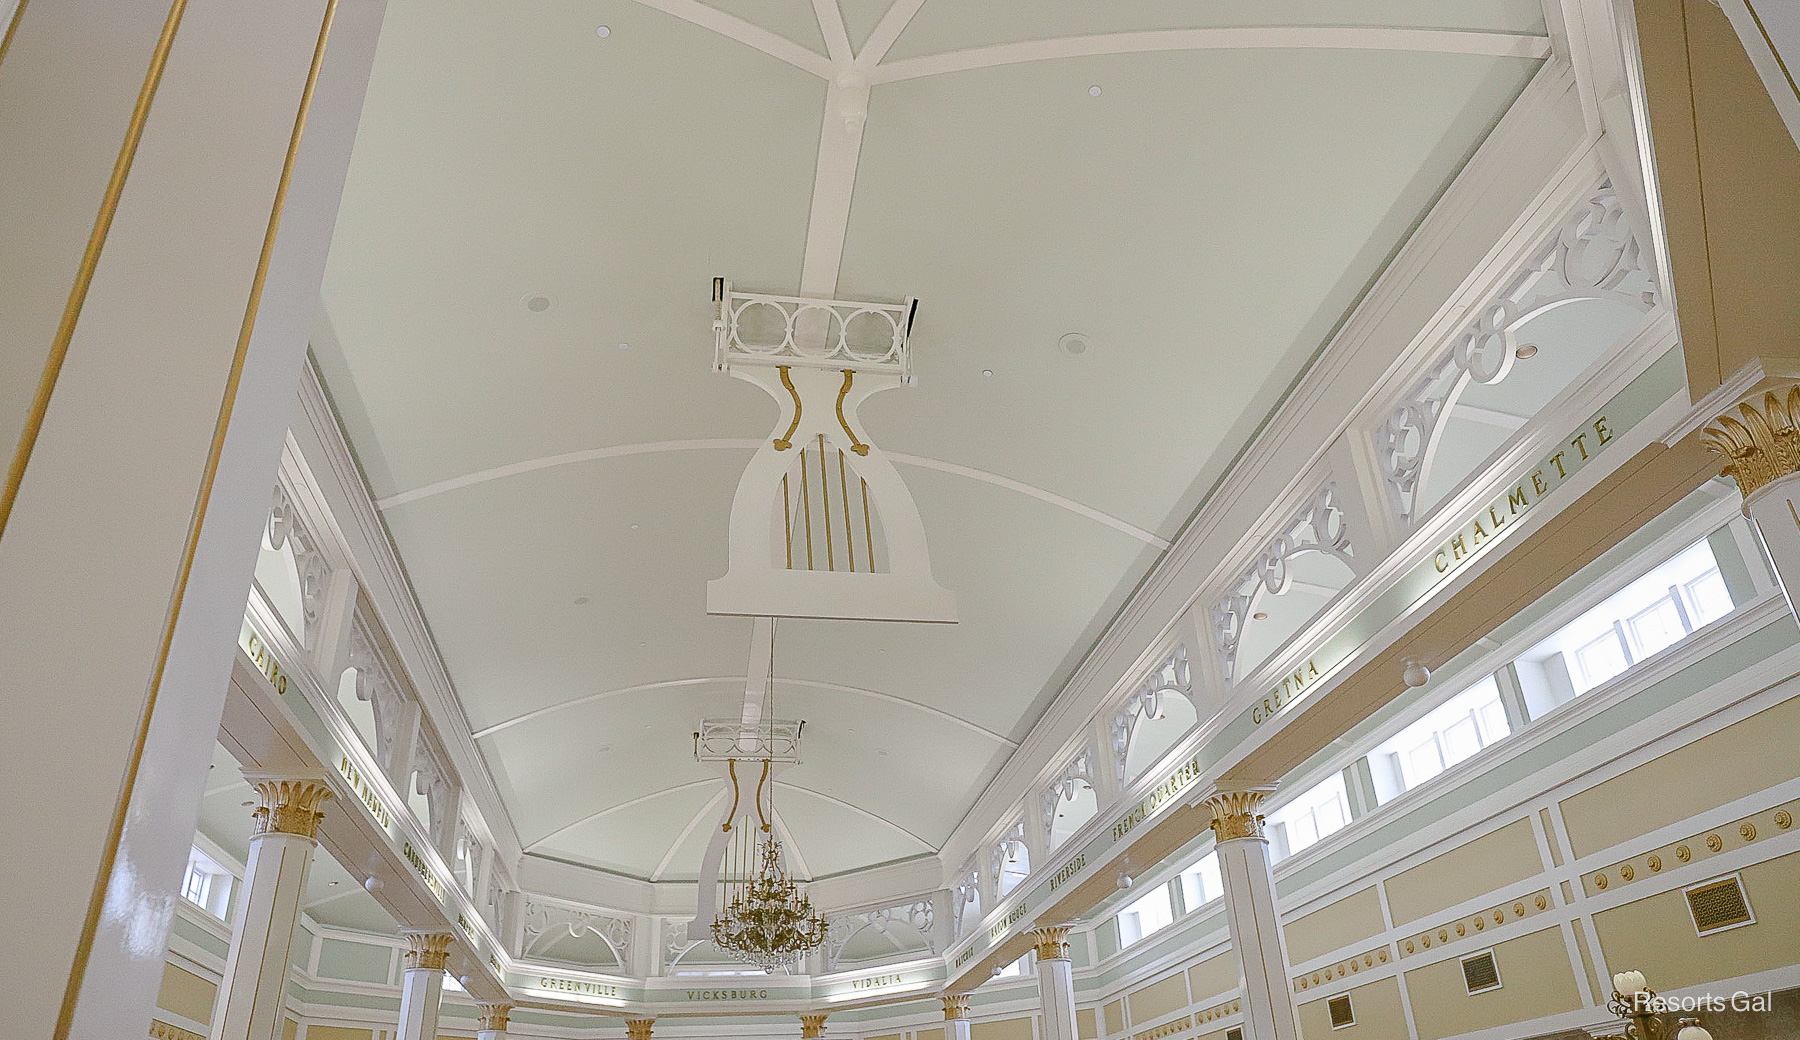 the old-fashioned ceiling fans in the lobby of Port Orleans Riverside 